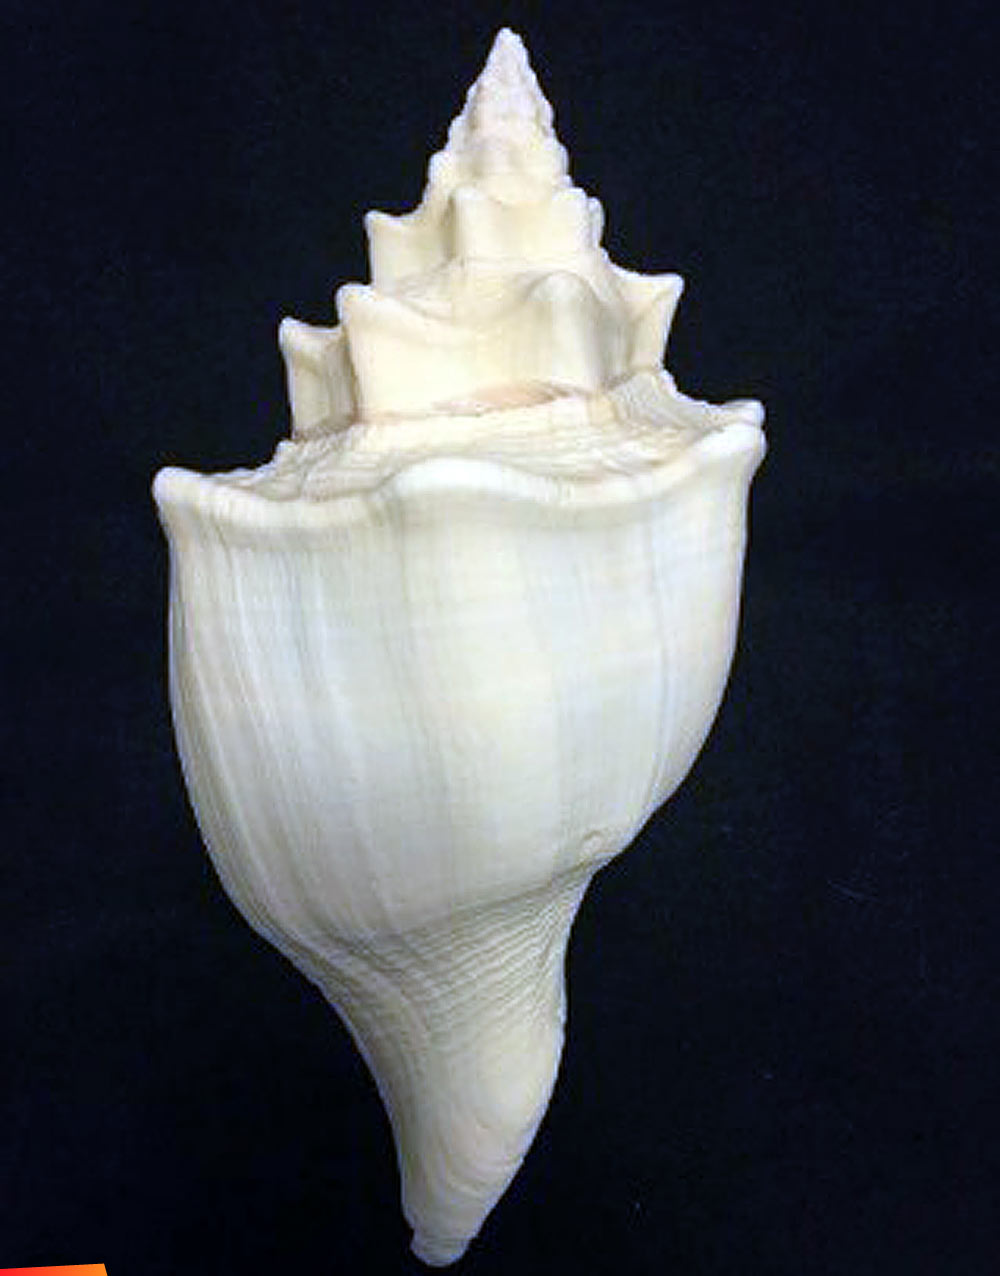 Huge horse conch shell